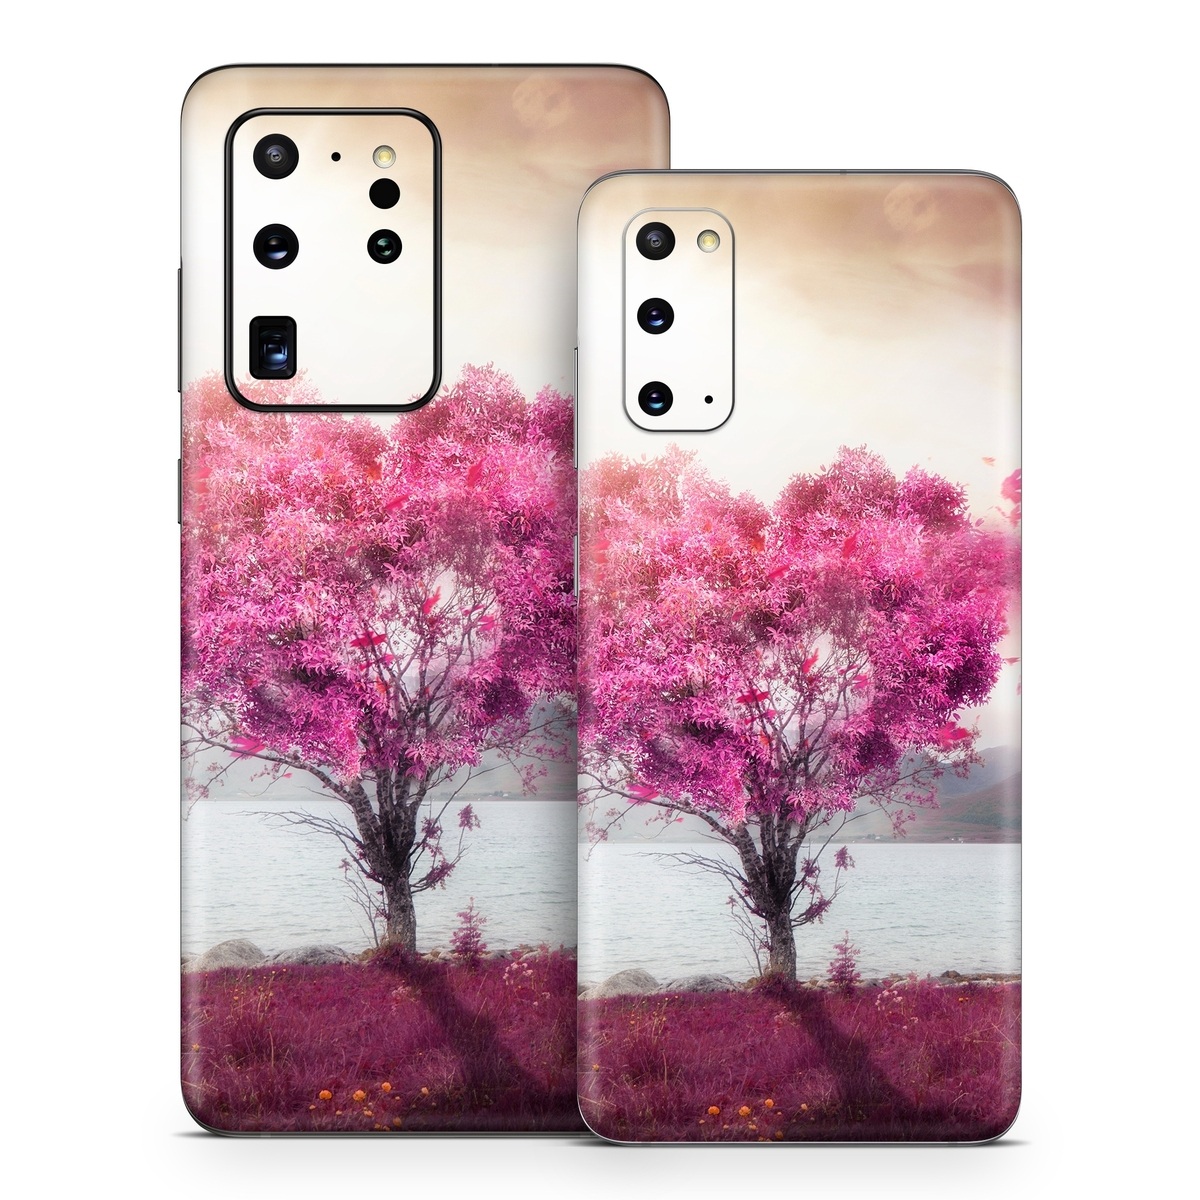 Samsung Galaxy S20 Series Skin design of Sky, Nature, Natural landscape, Pink, Tree, Spring, Purple, Landscape, Cloud, Magenta, with pink, yellow, blue, black, gray colors